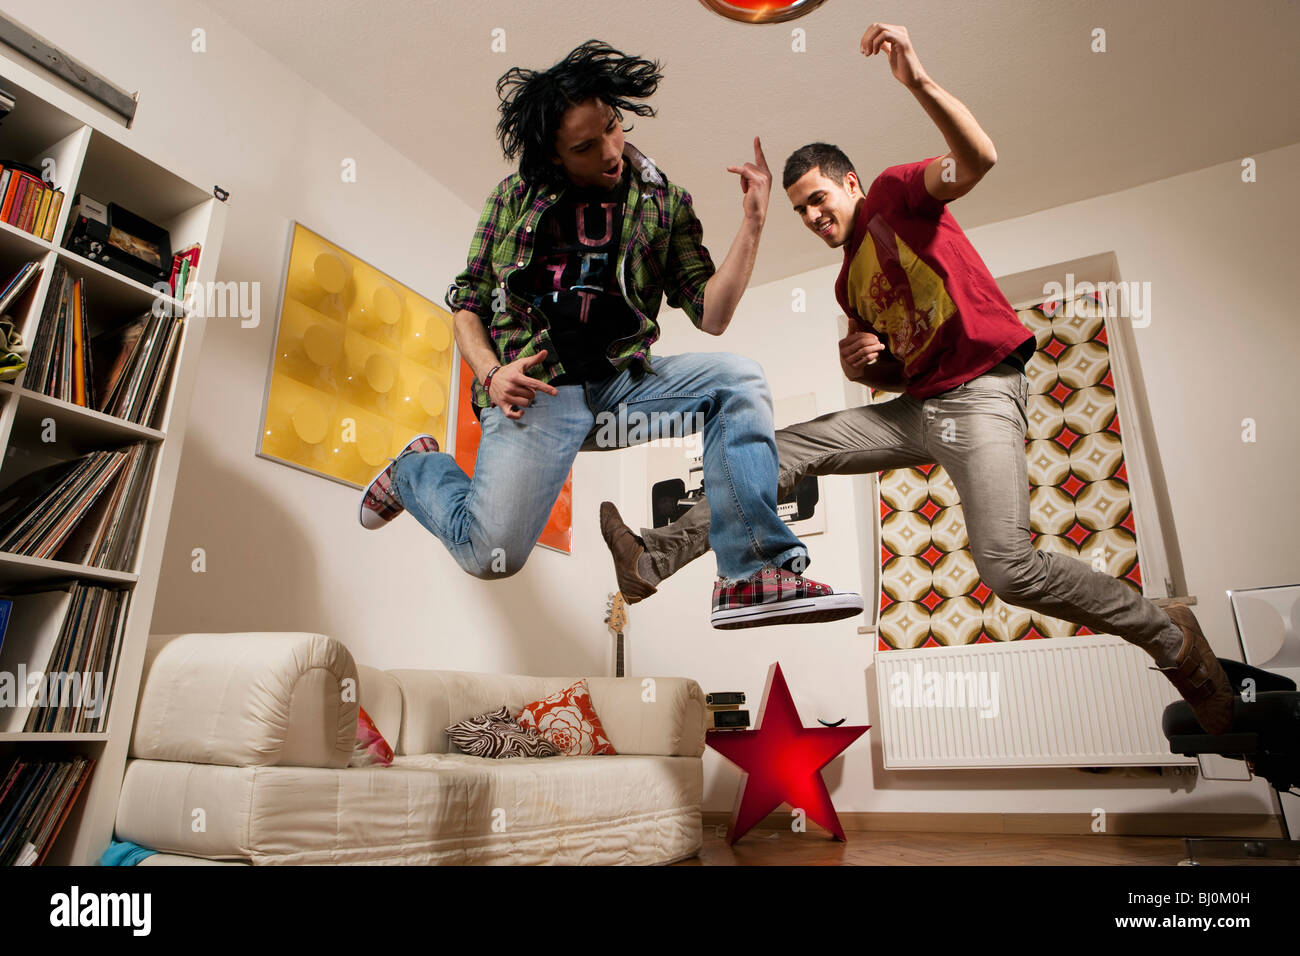 two young men at party playing air guitar Stock Photo